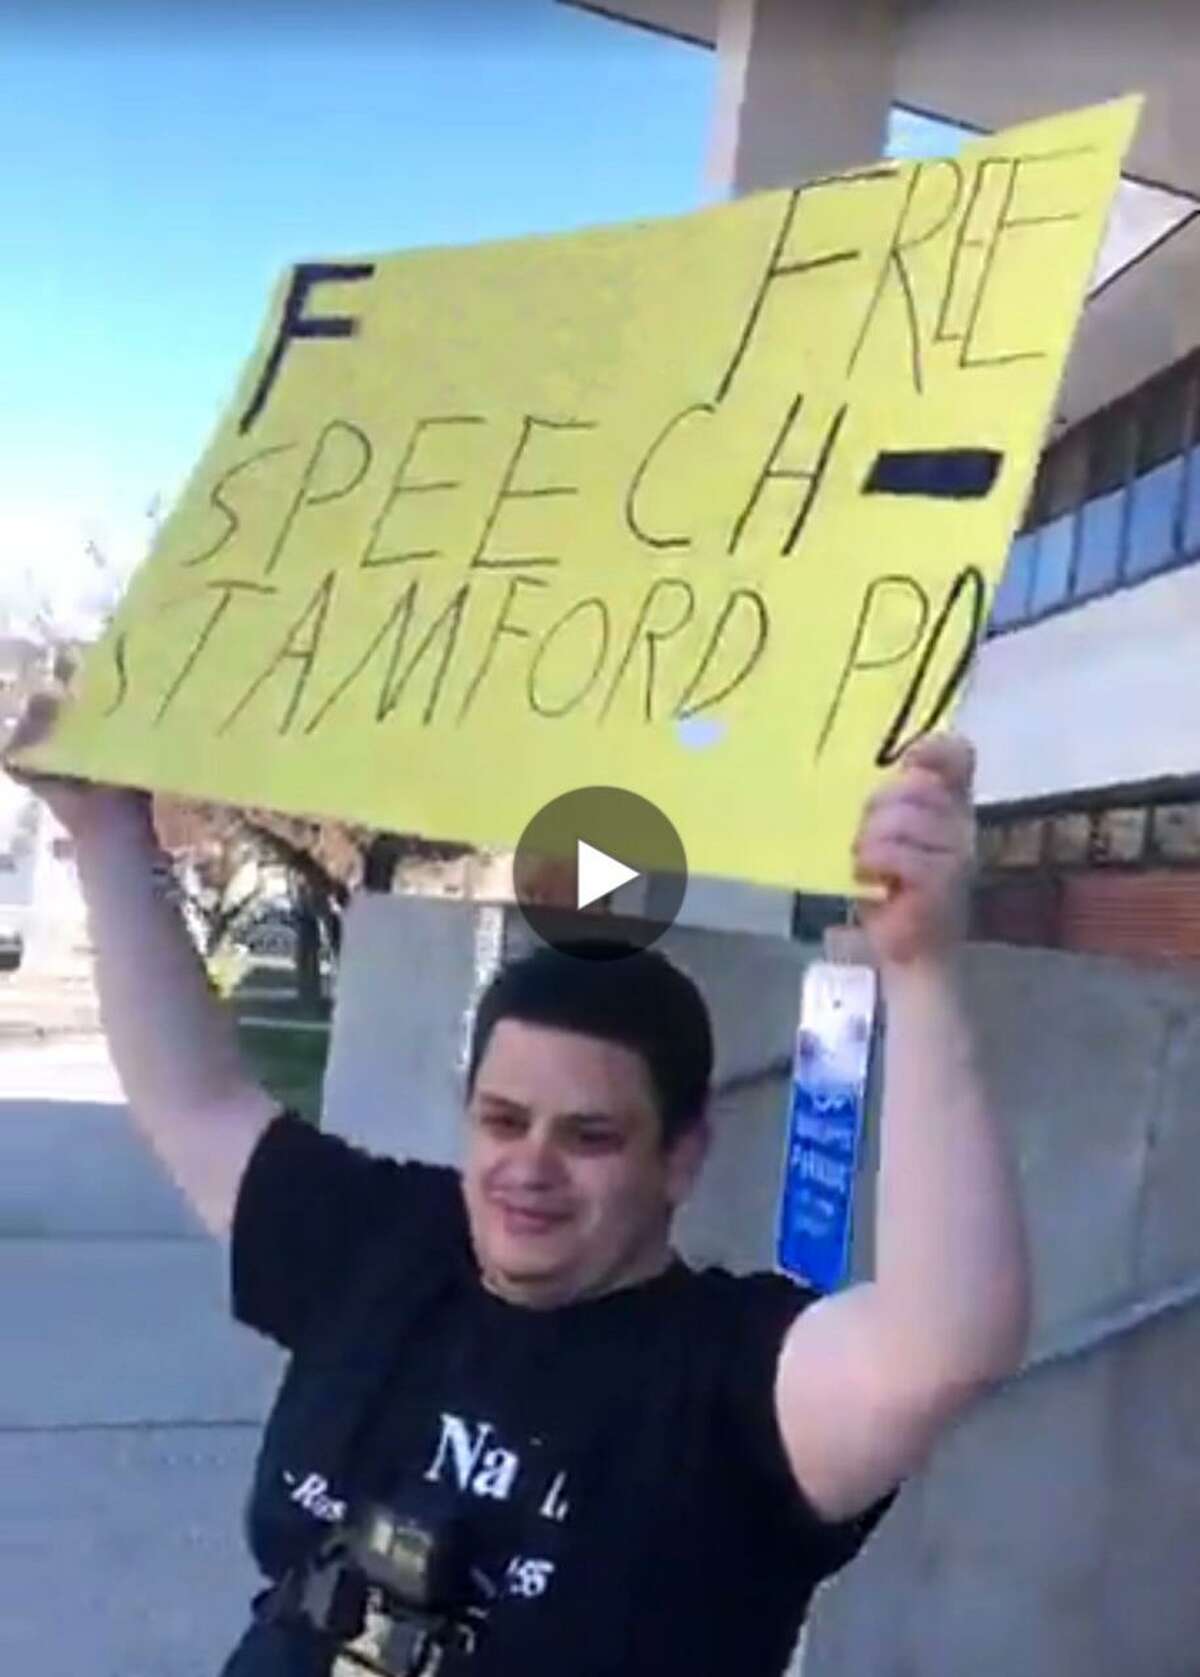 NOTE: photo has been altered to take out offensive language. Michael Picard, of Hartford, held a sign outside the Stamford courthouse and the police department Thursday, April 26, 2018. in protest of a friend's arrest for interfering with a distracted driving checkpoint earlier this month.